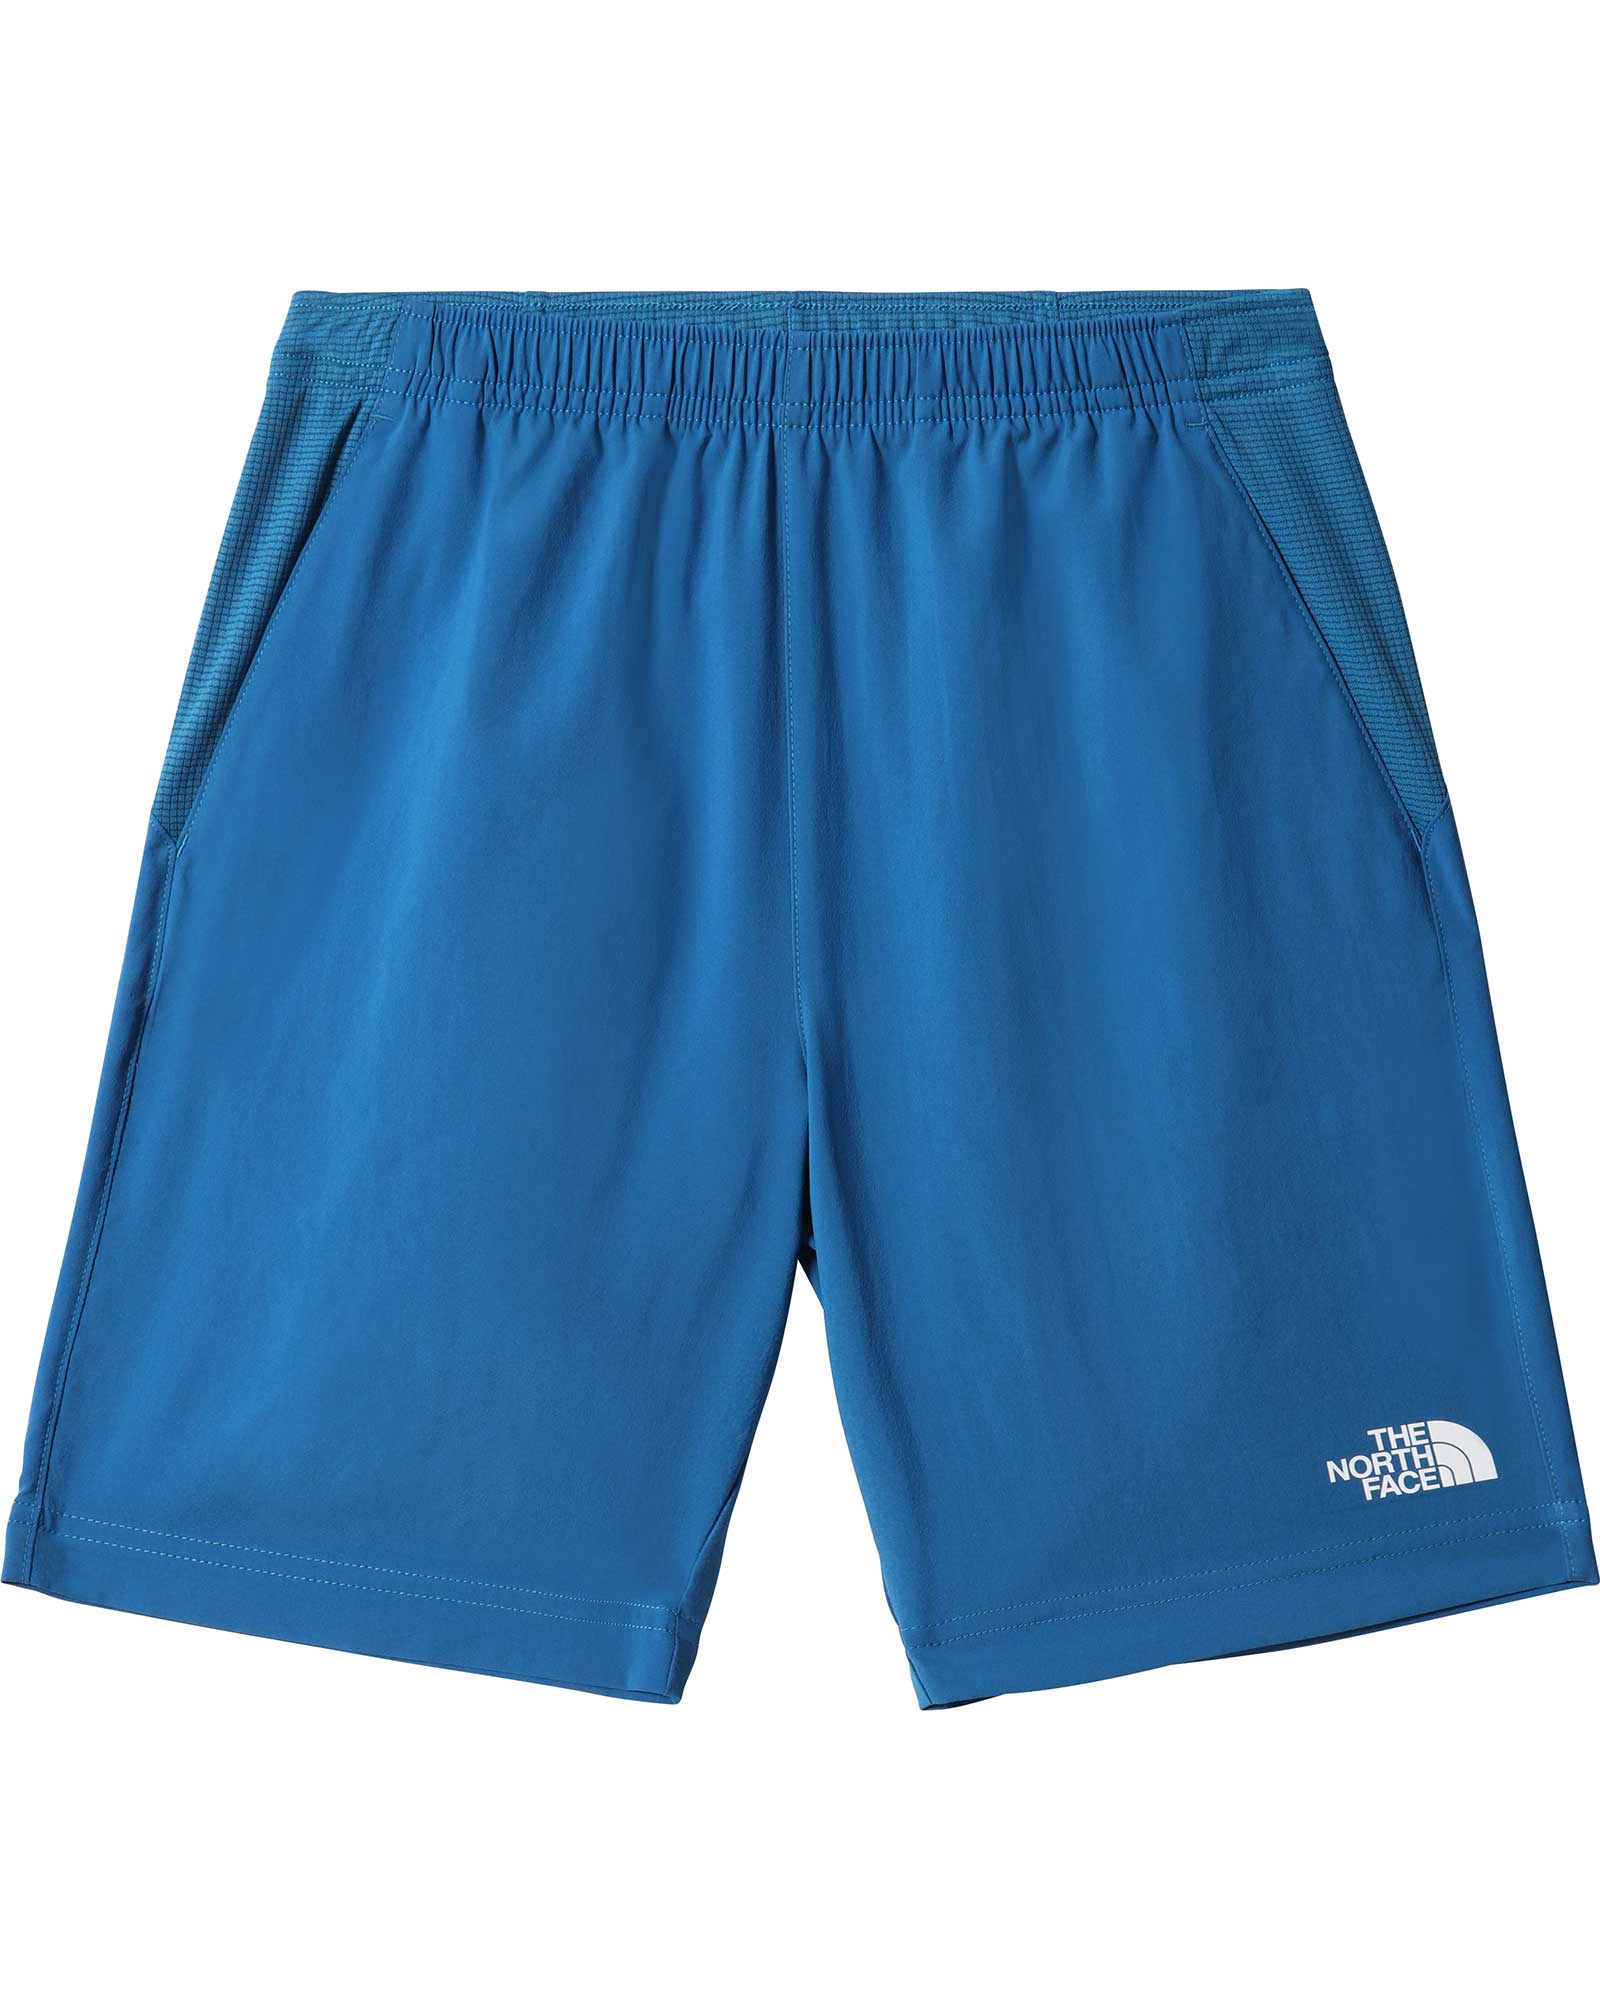 Product image of The North Face Reactor Boys' Short XL